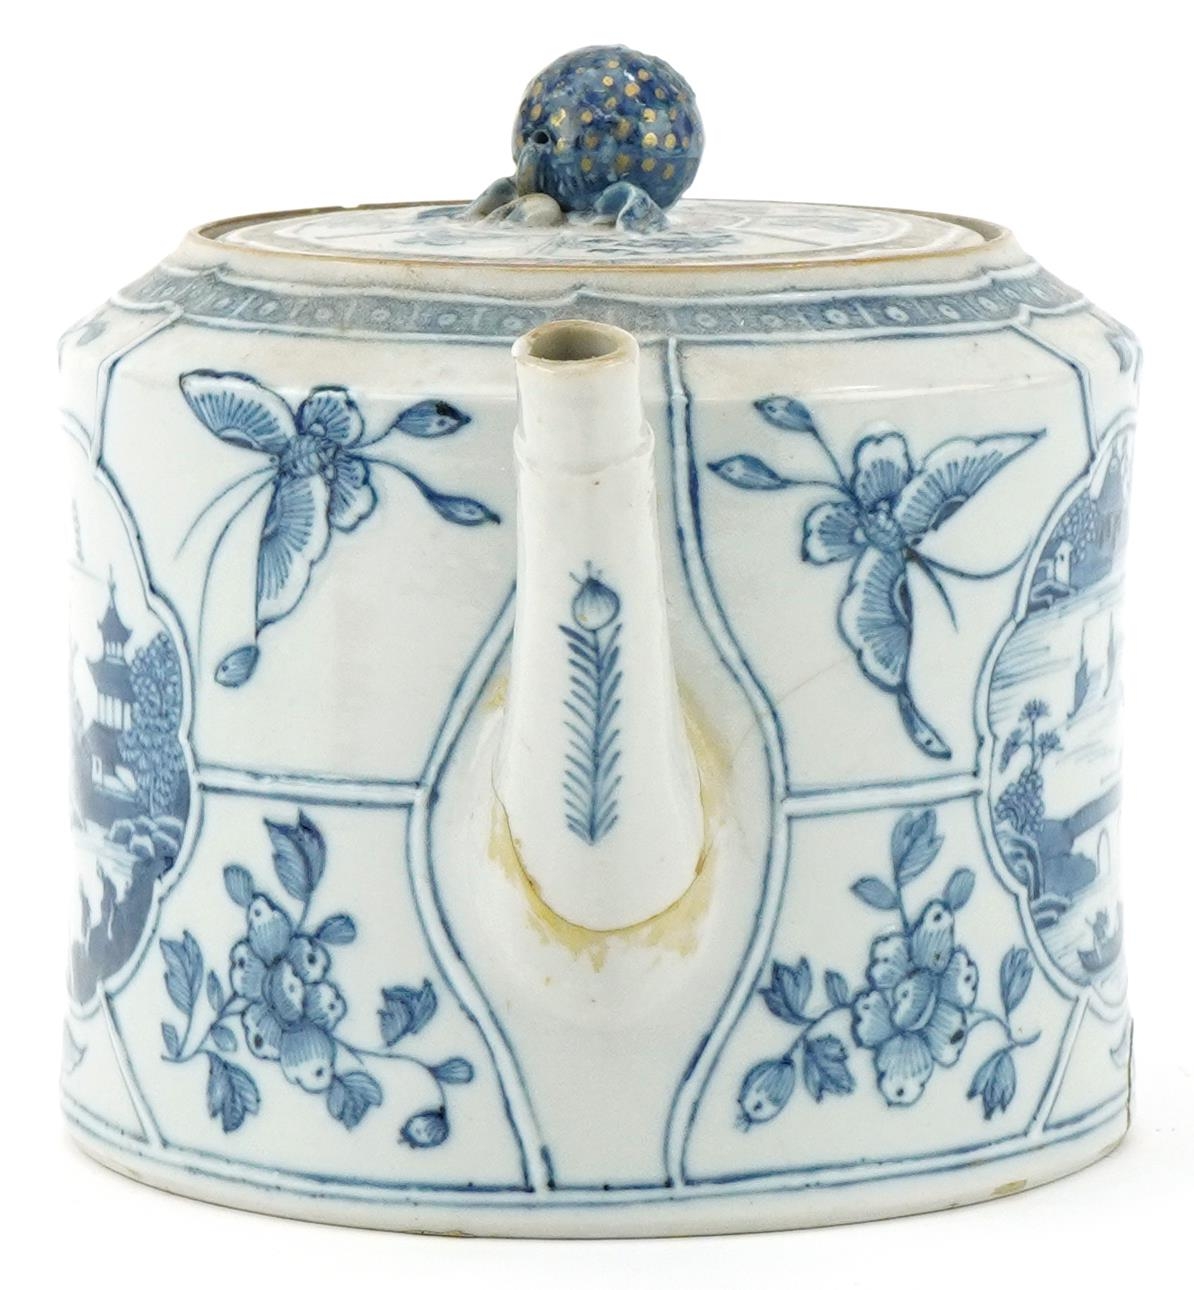 18th century Chinese porcelain teapot hand painted in the Willow pattern, 14cm high - Image 5 of 7